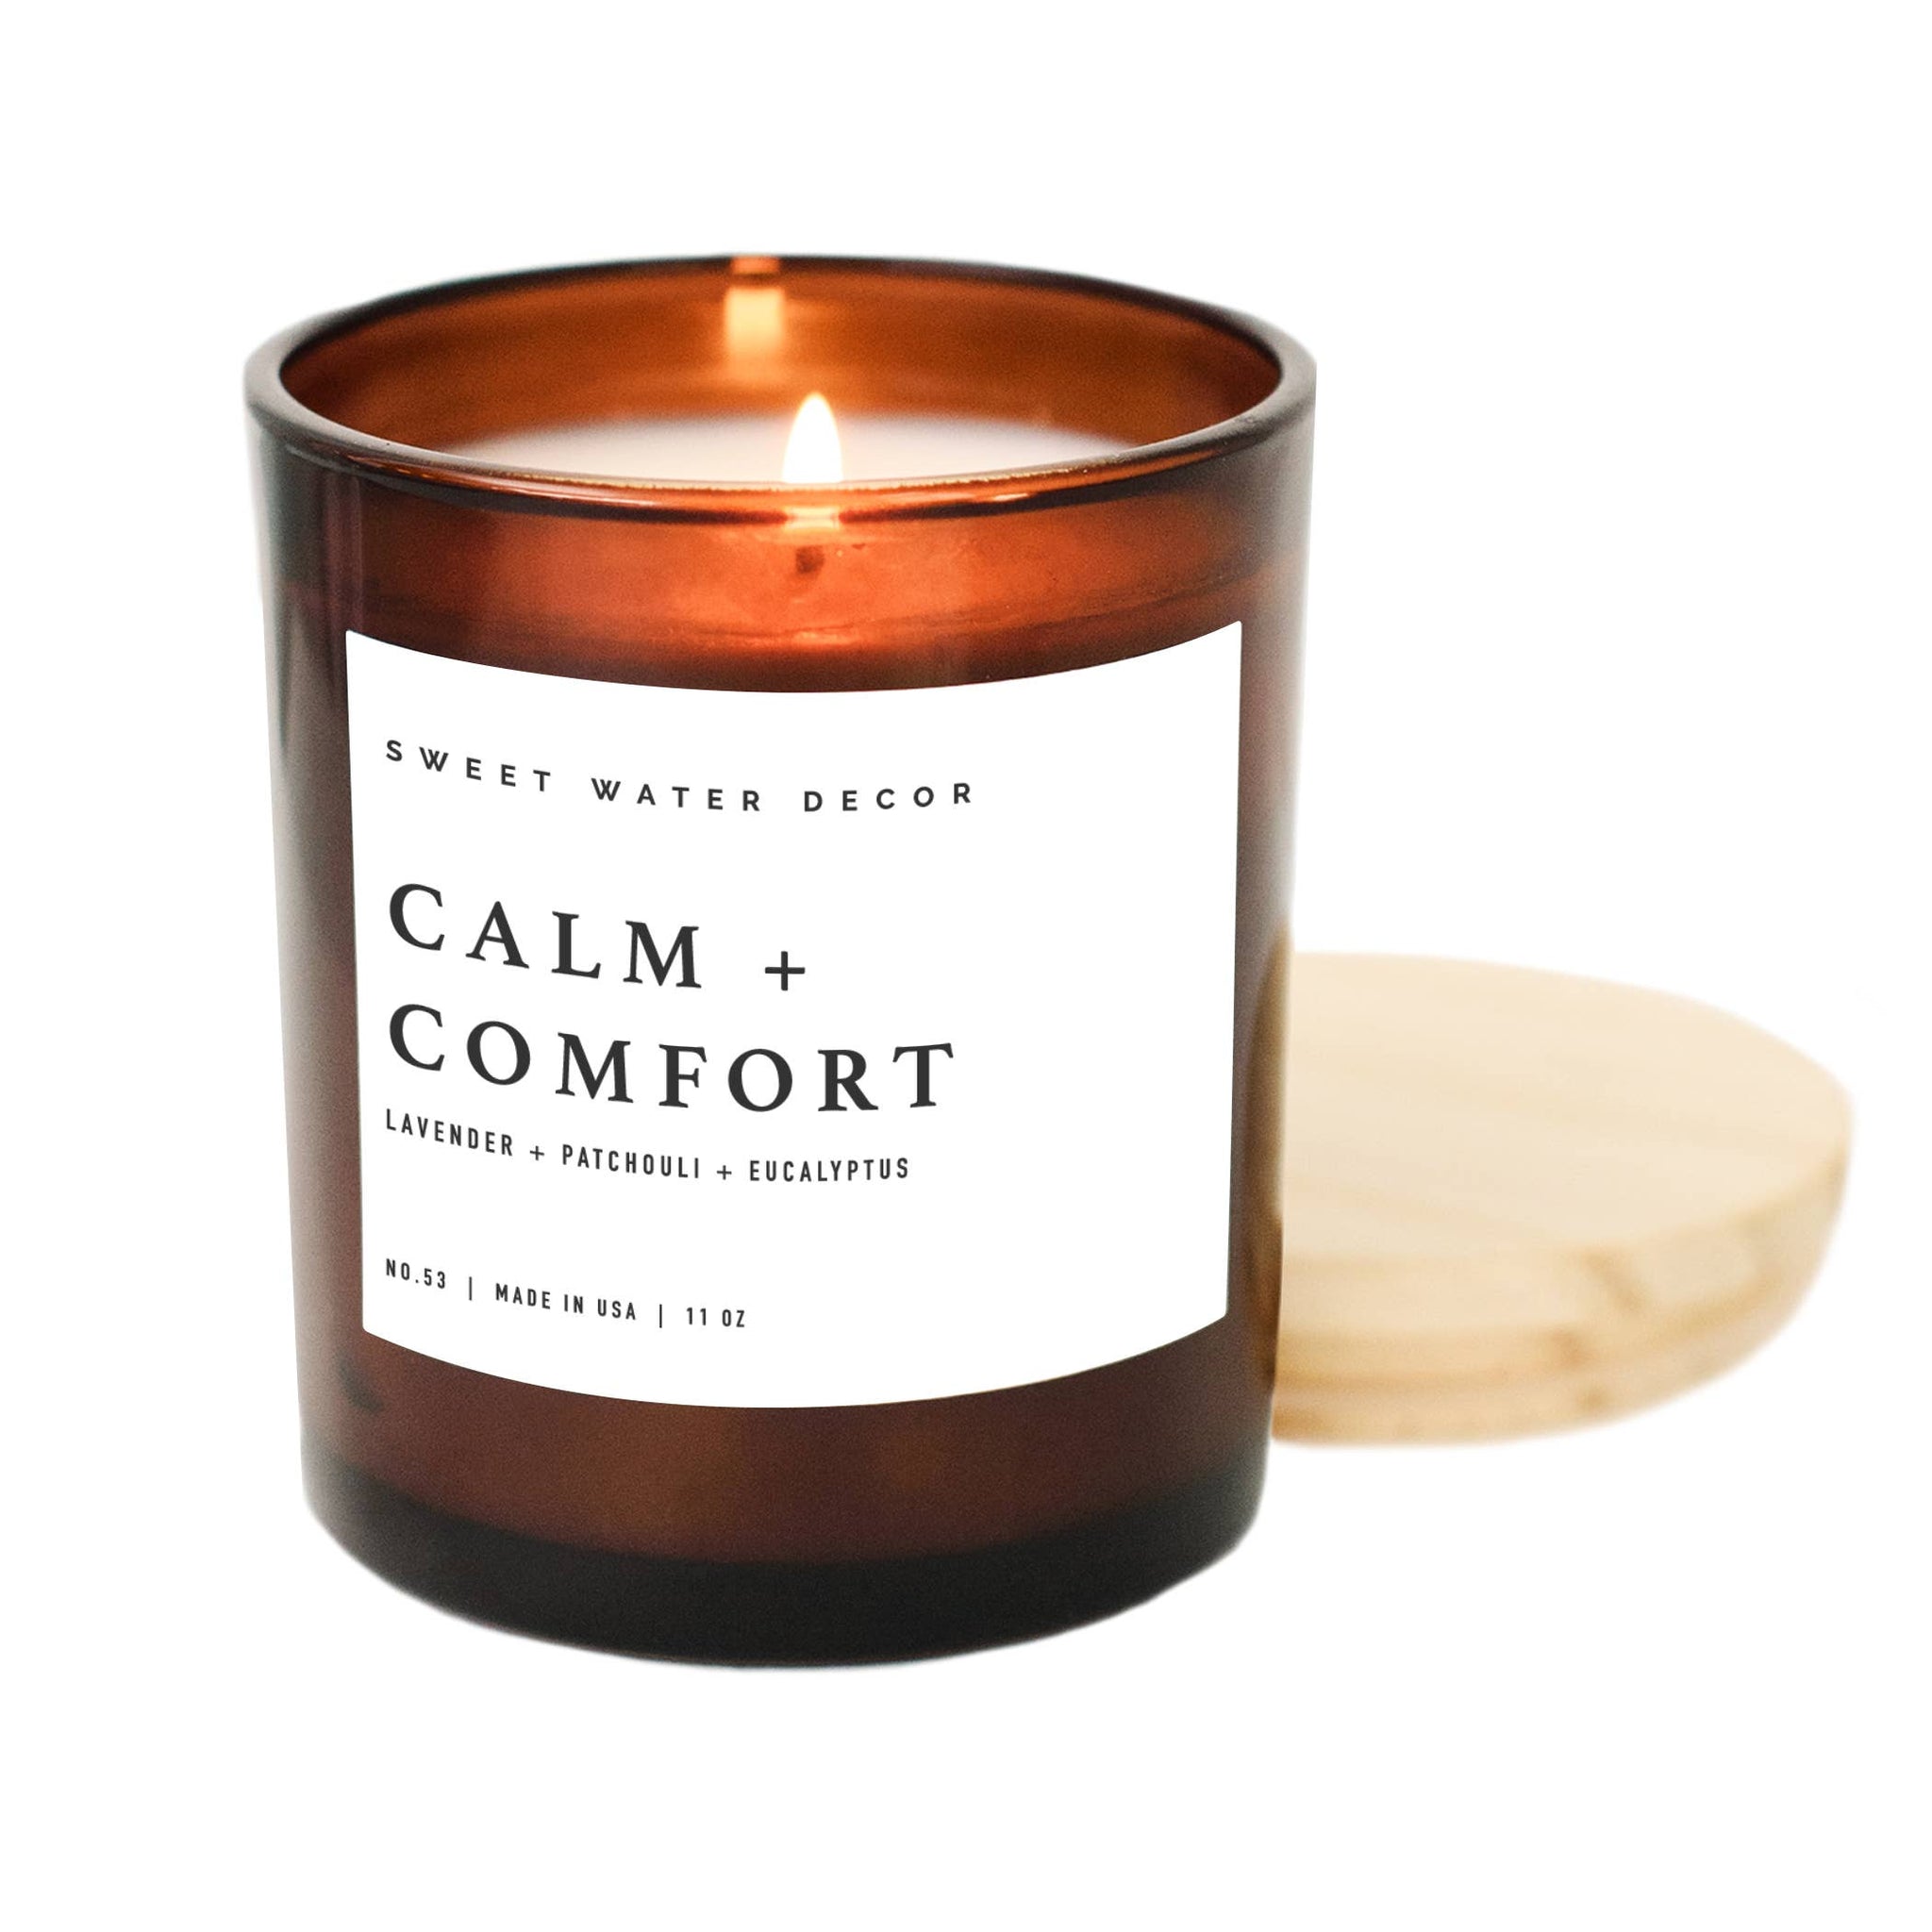 Calm and Comfort Soy Candle - Amber Jar - 11 oz